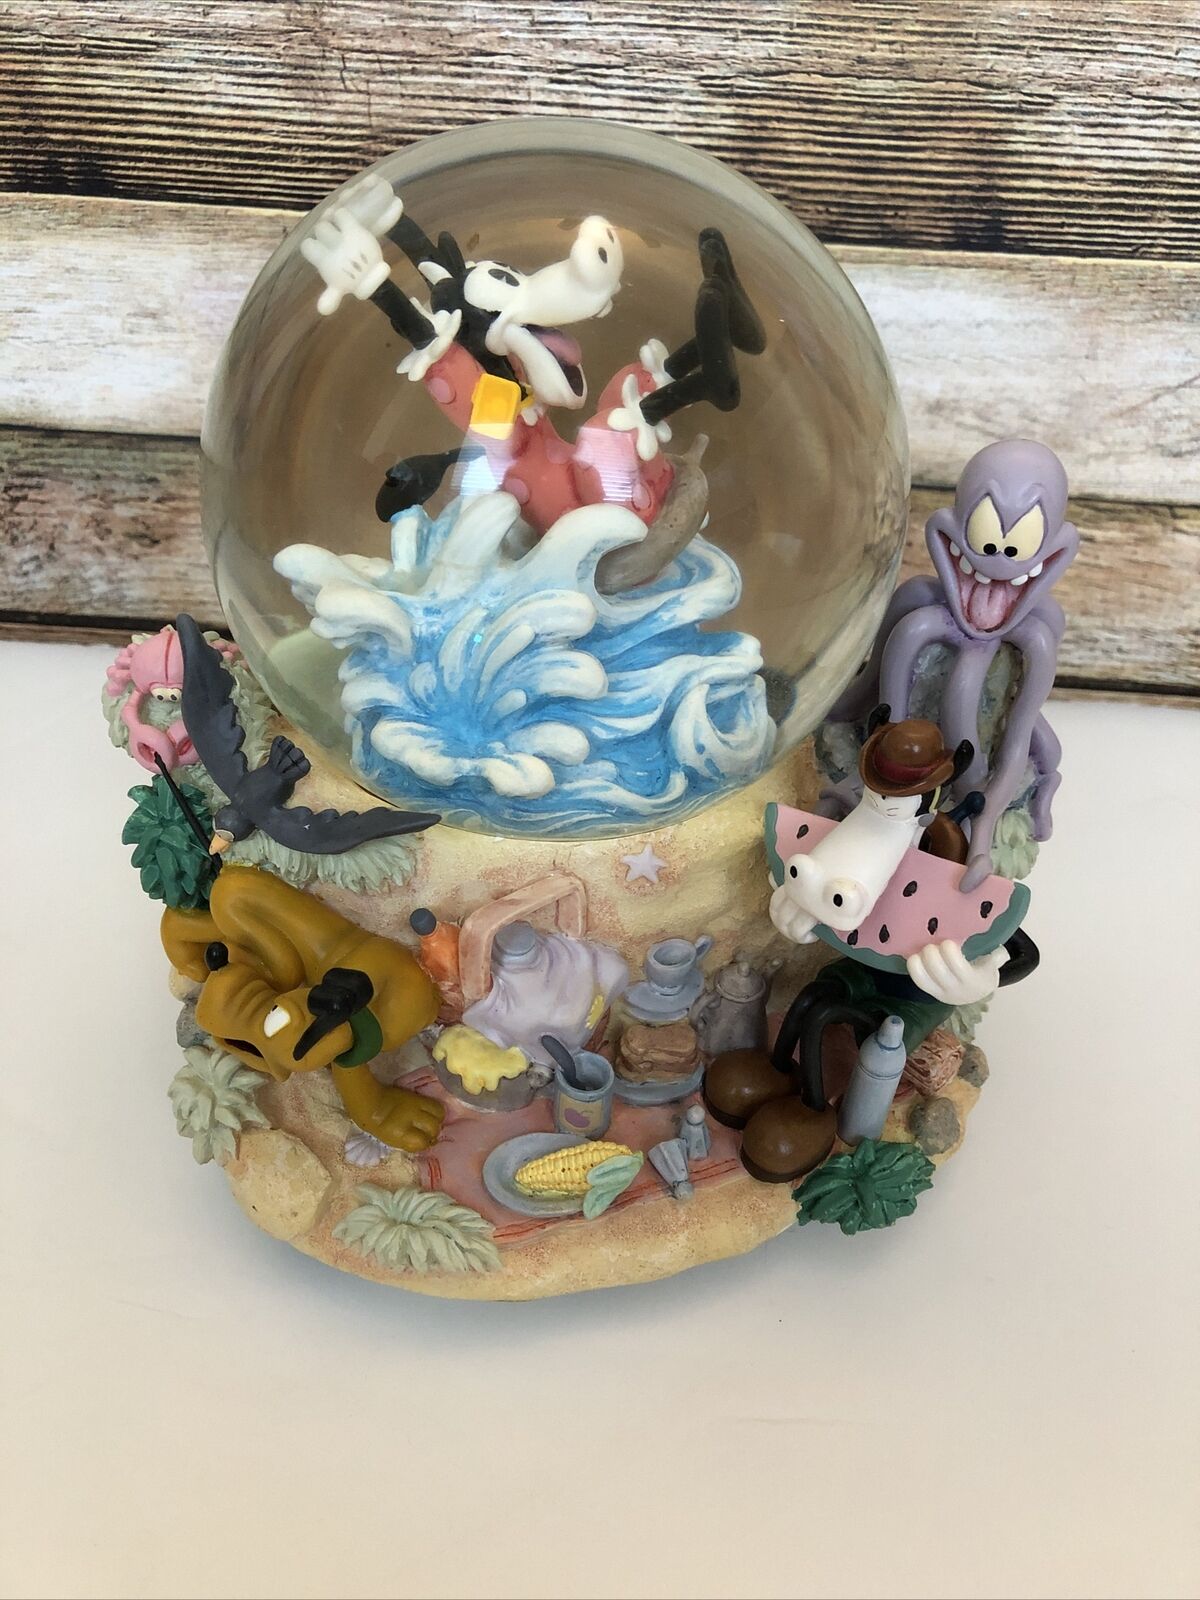 DISNEY STORE HORACE CLARABELLE PLUTO MICKEY MINNIE MOUSE MUSICAL SNOWGLOBE